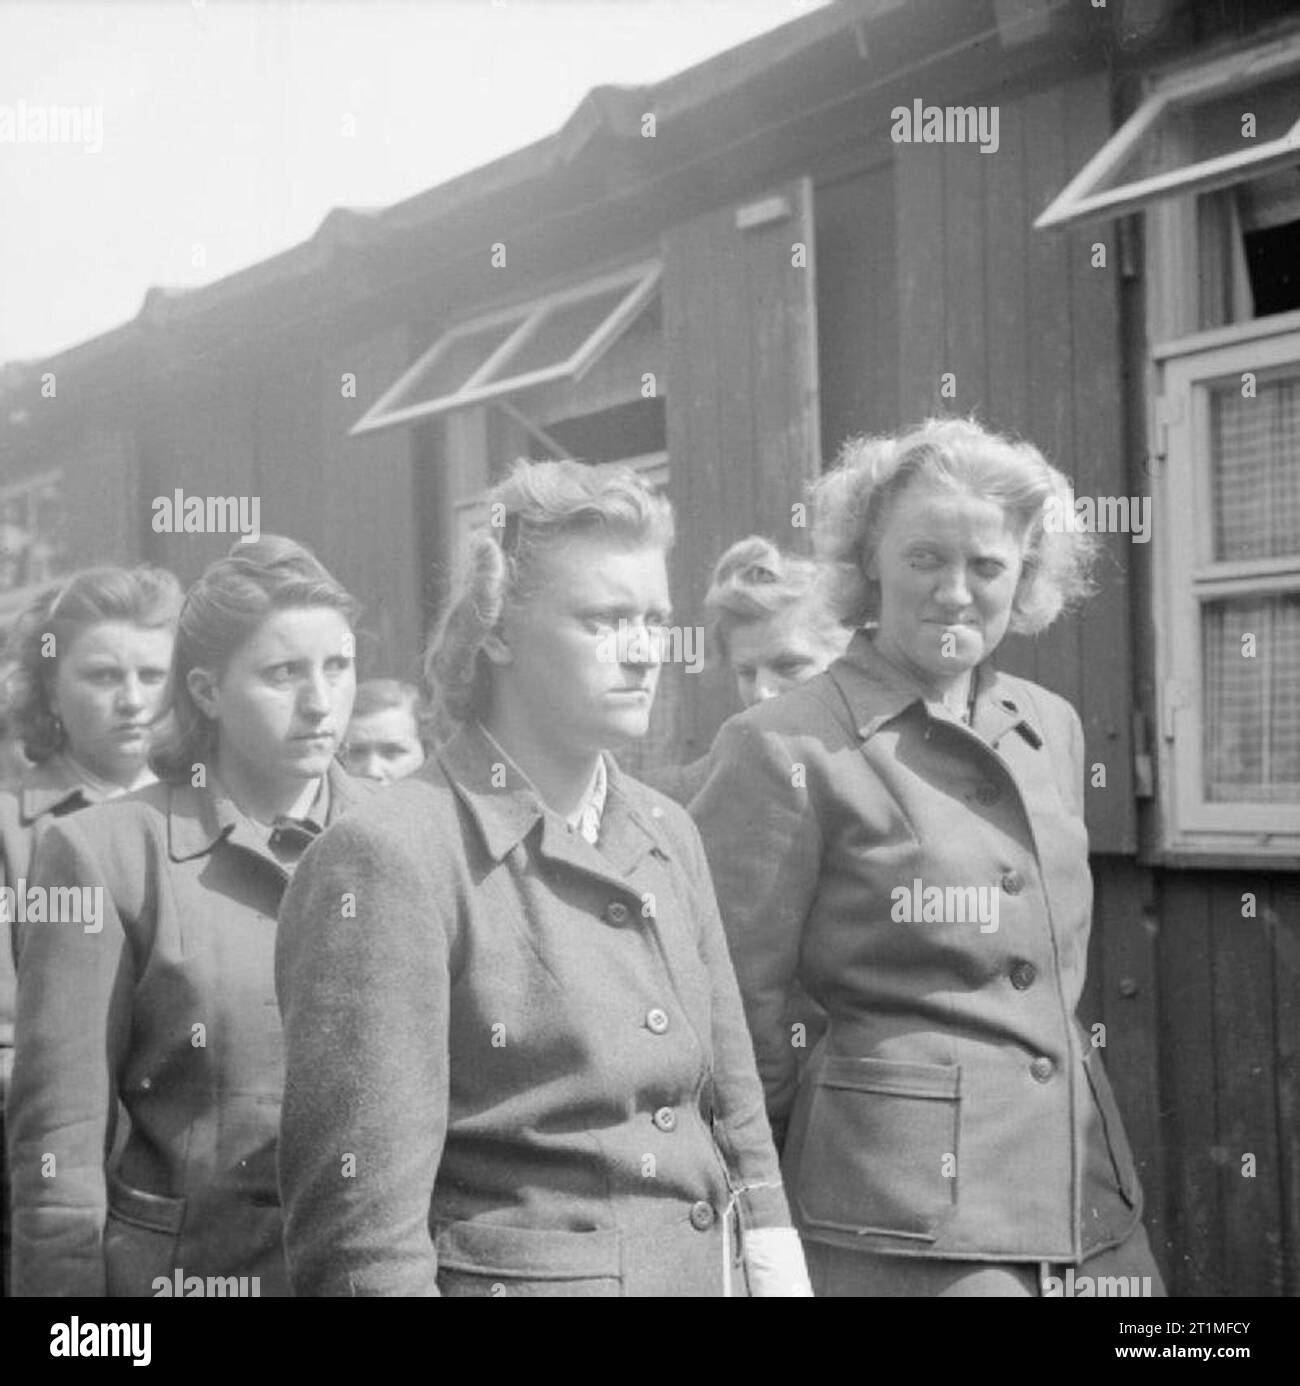 The Liberation of Bergen-belsen Concentration Camp, April 1945 SS women camp guards are paraded for work in clearing the dead. The women include Hildegard Kanbach (first from left), Irene Haschke (centre, third from right), the Head Wardress, Elisabeth Volkenrath (second from right, partially hidden) and Herta Bothe (first from right). Stock Photo